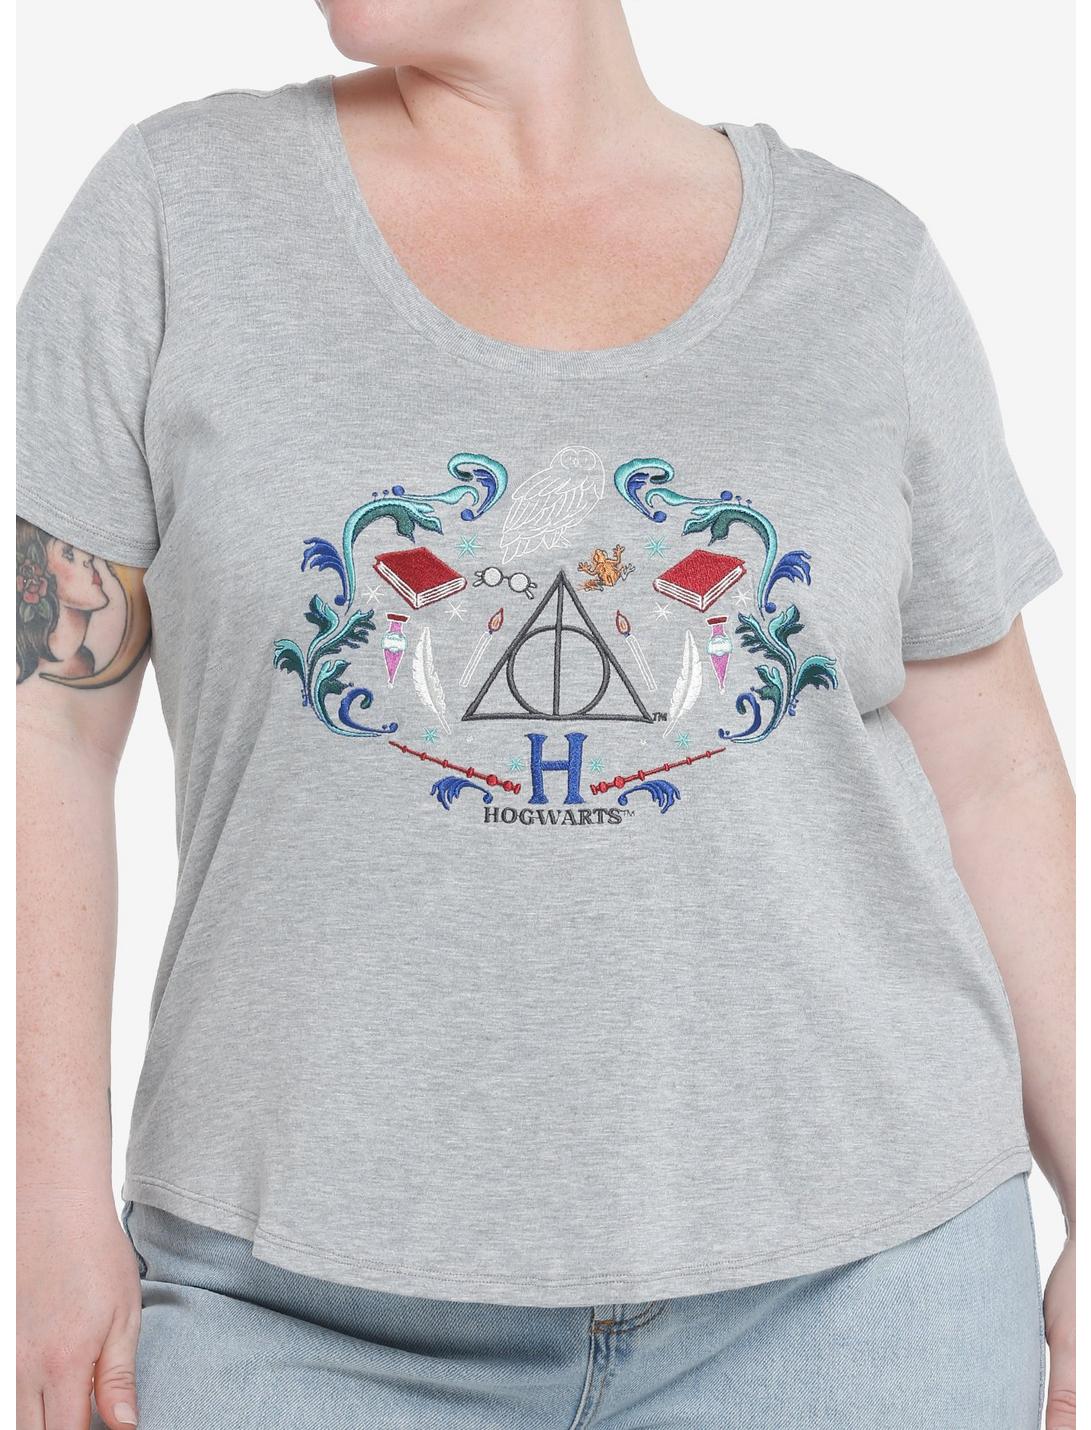 Her Universe Harry Potter The Deathly Hallows Scoop Neck Top Plus Size, HEATHER GREY, hi-res